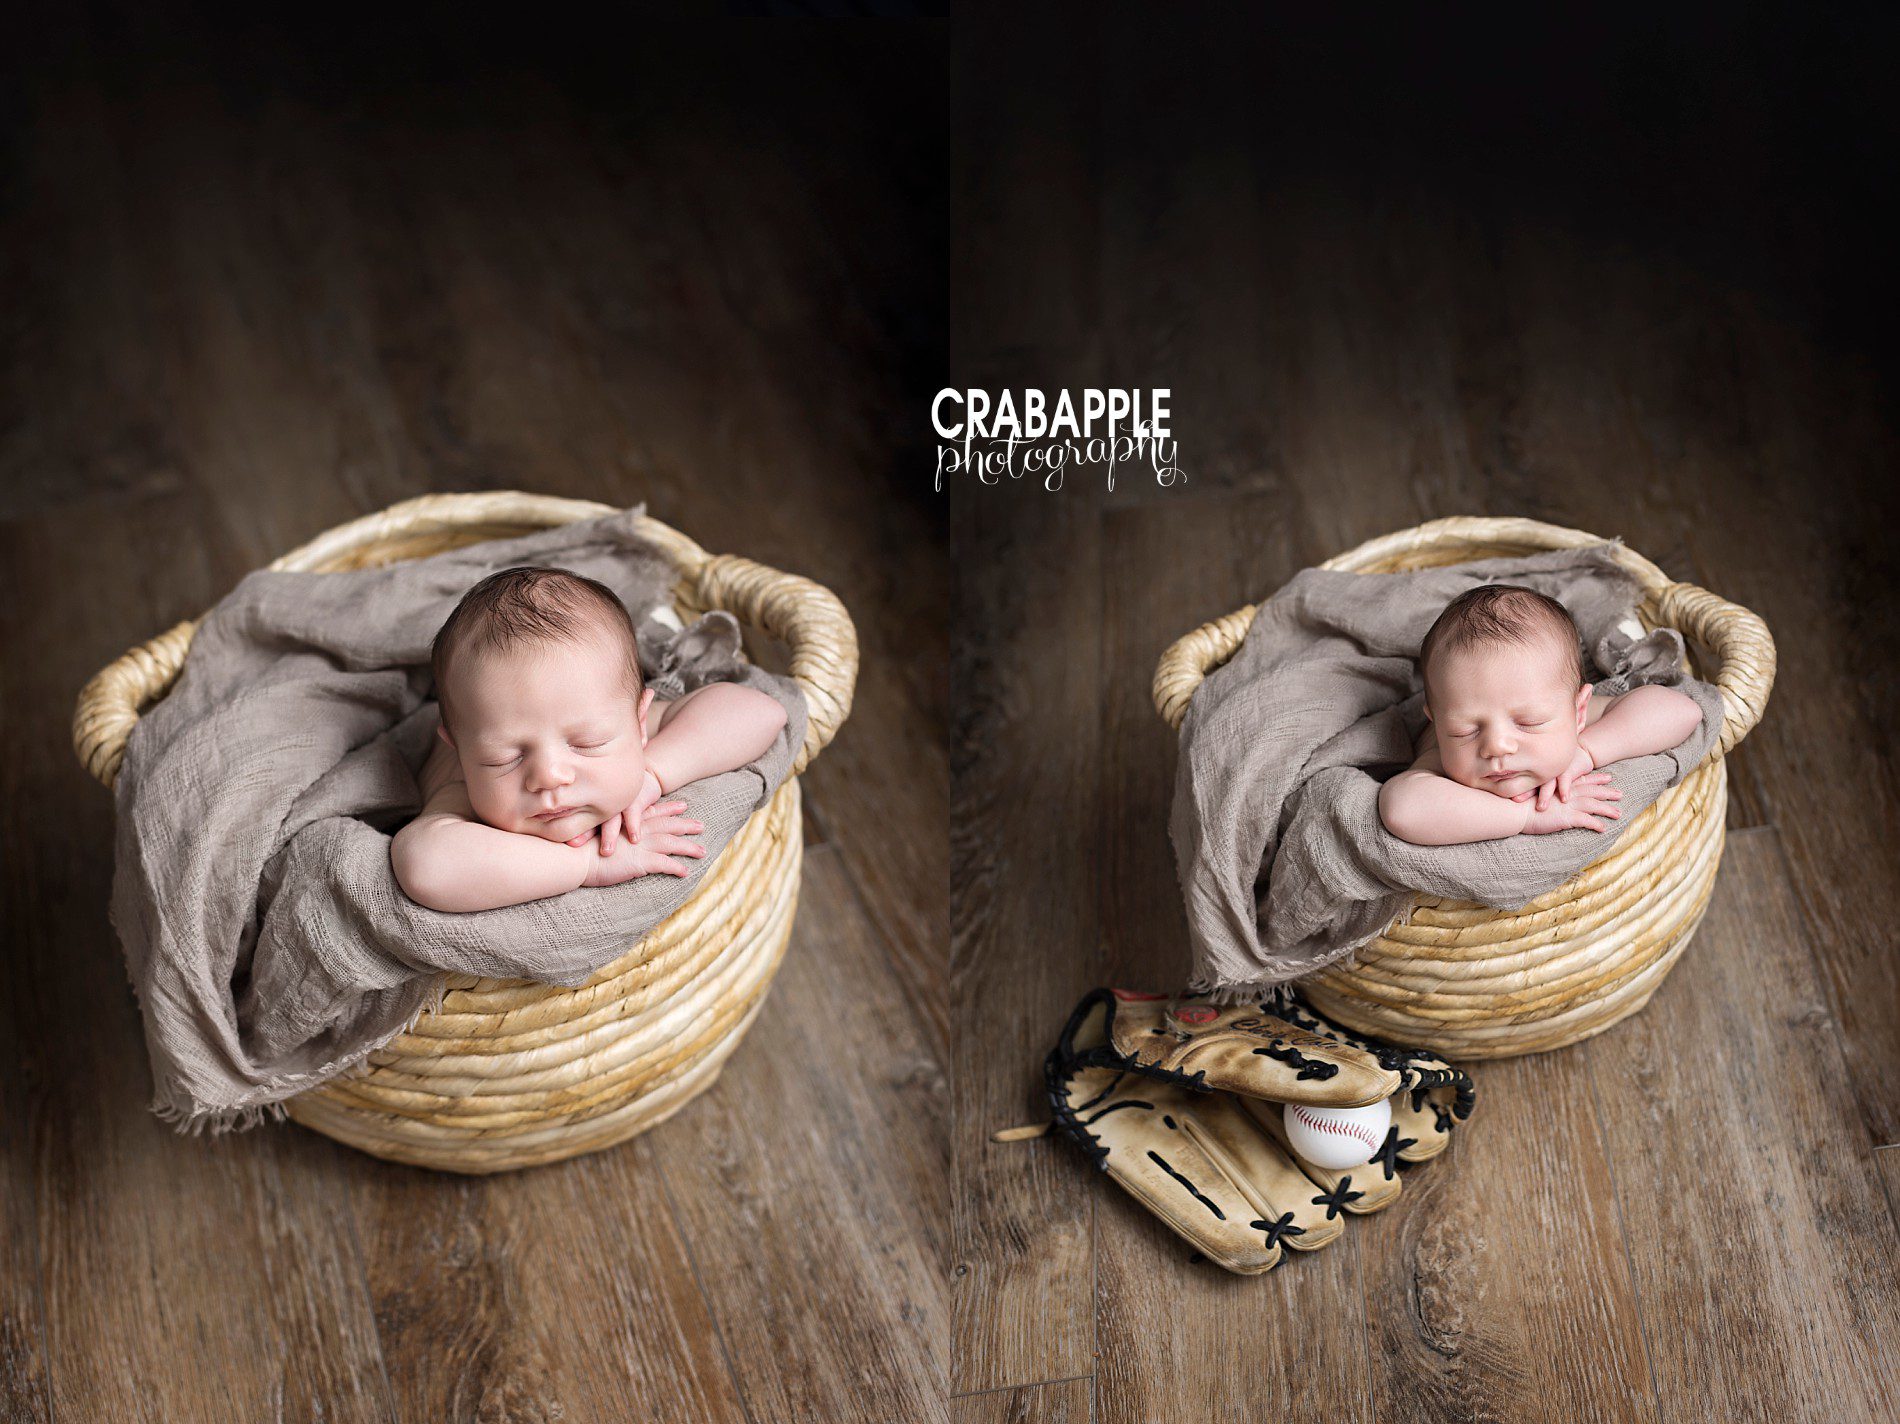 cute ideas for props for newborn photos with baseball glove